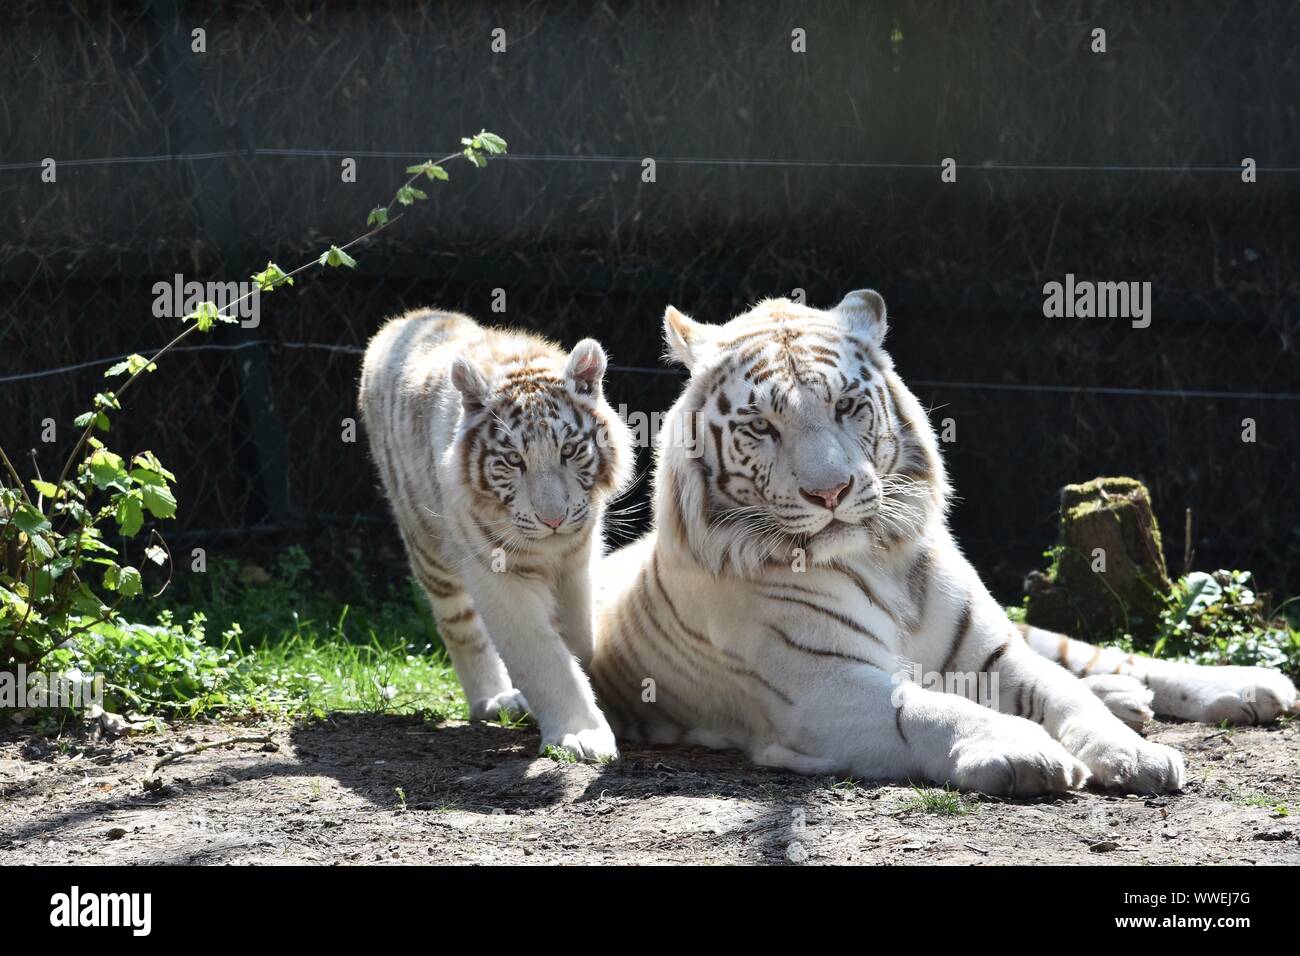 White Tigers, mother and son relaxing on ground Stock Photo